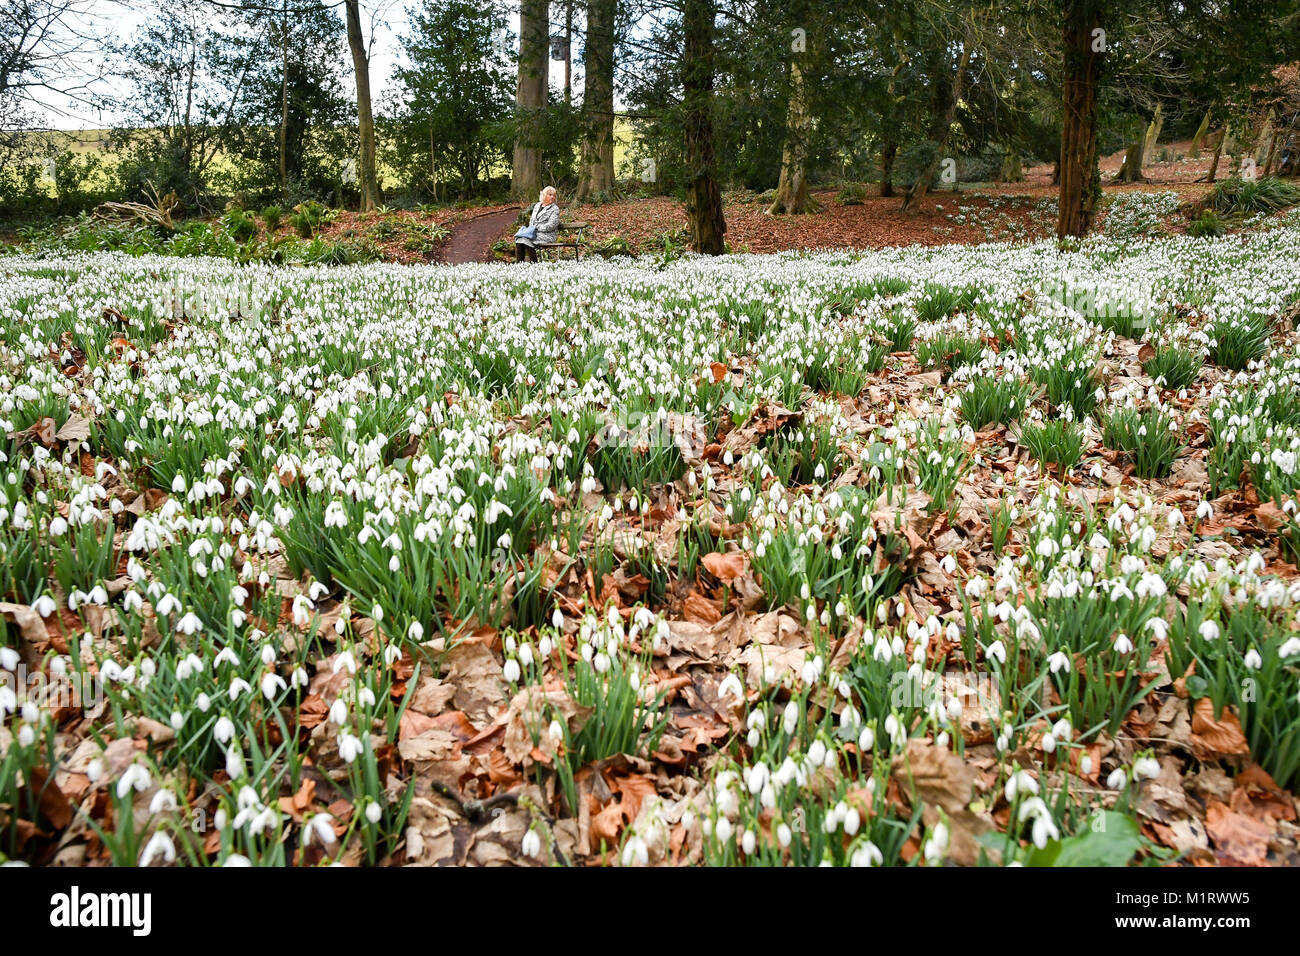 Snowdrops at Rococo Garden in Painswick, Gloucestershire, where the traditional winter flowers are in full bloom. Stock Photo